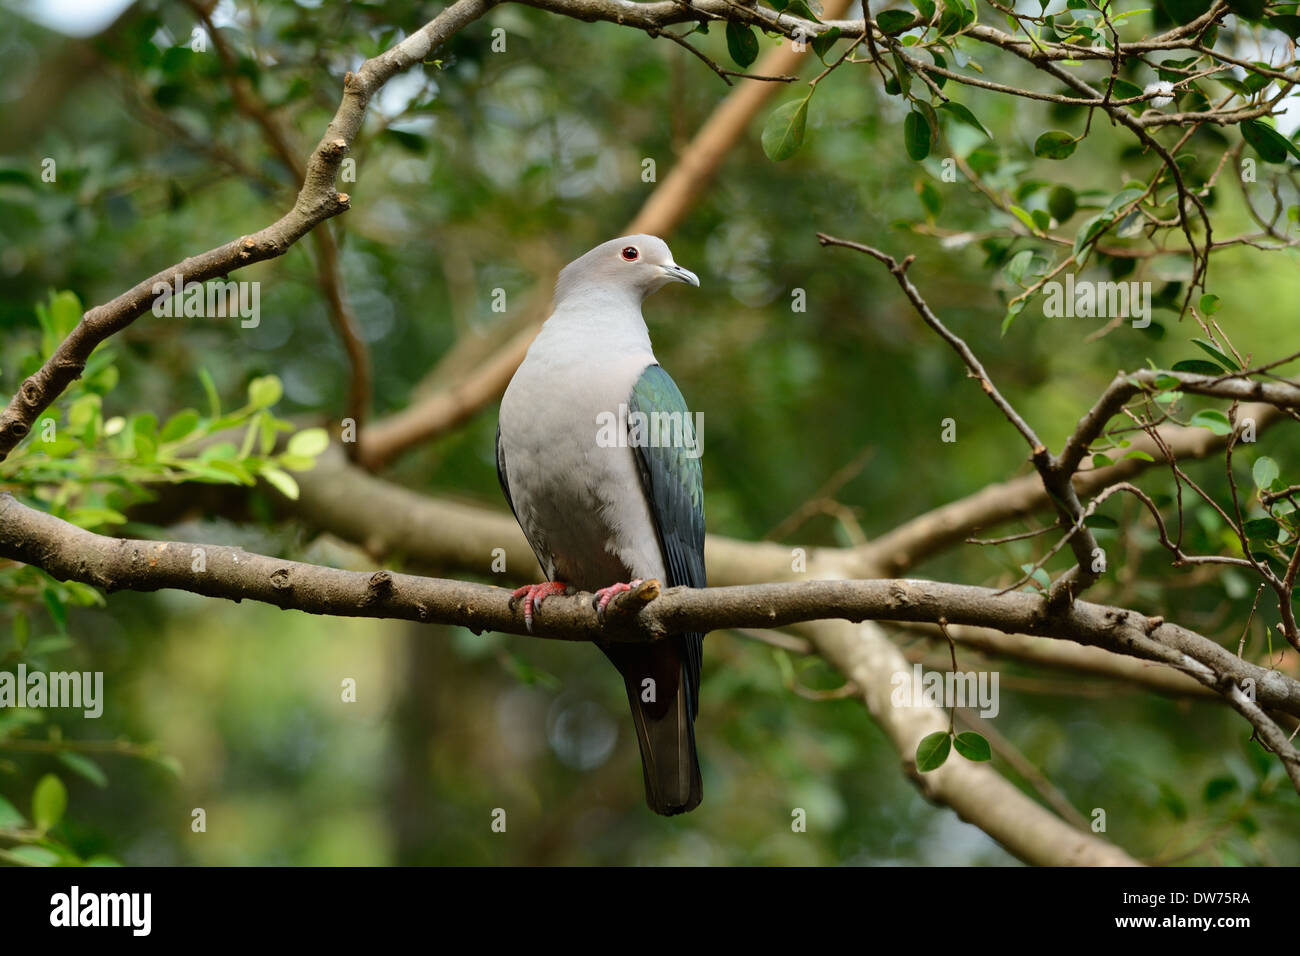 beautiful Green Imperial Pigeon (Ducula aenea) standing on branch Stock Photo